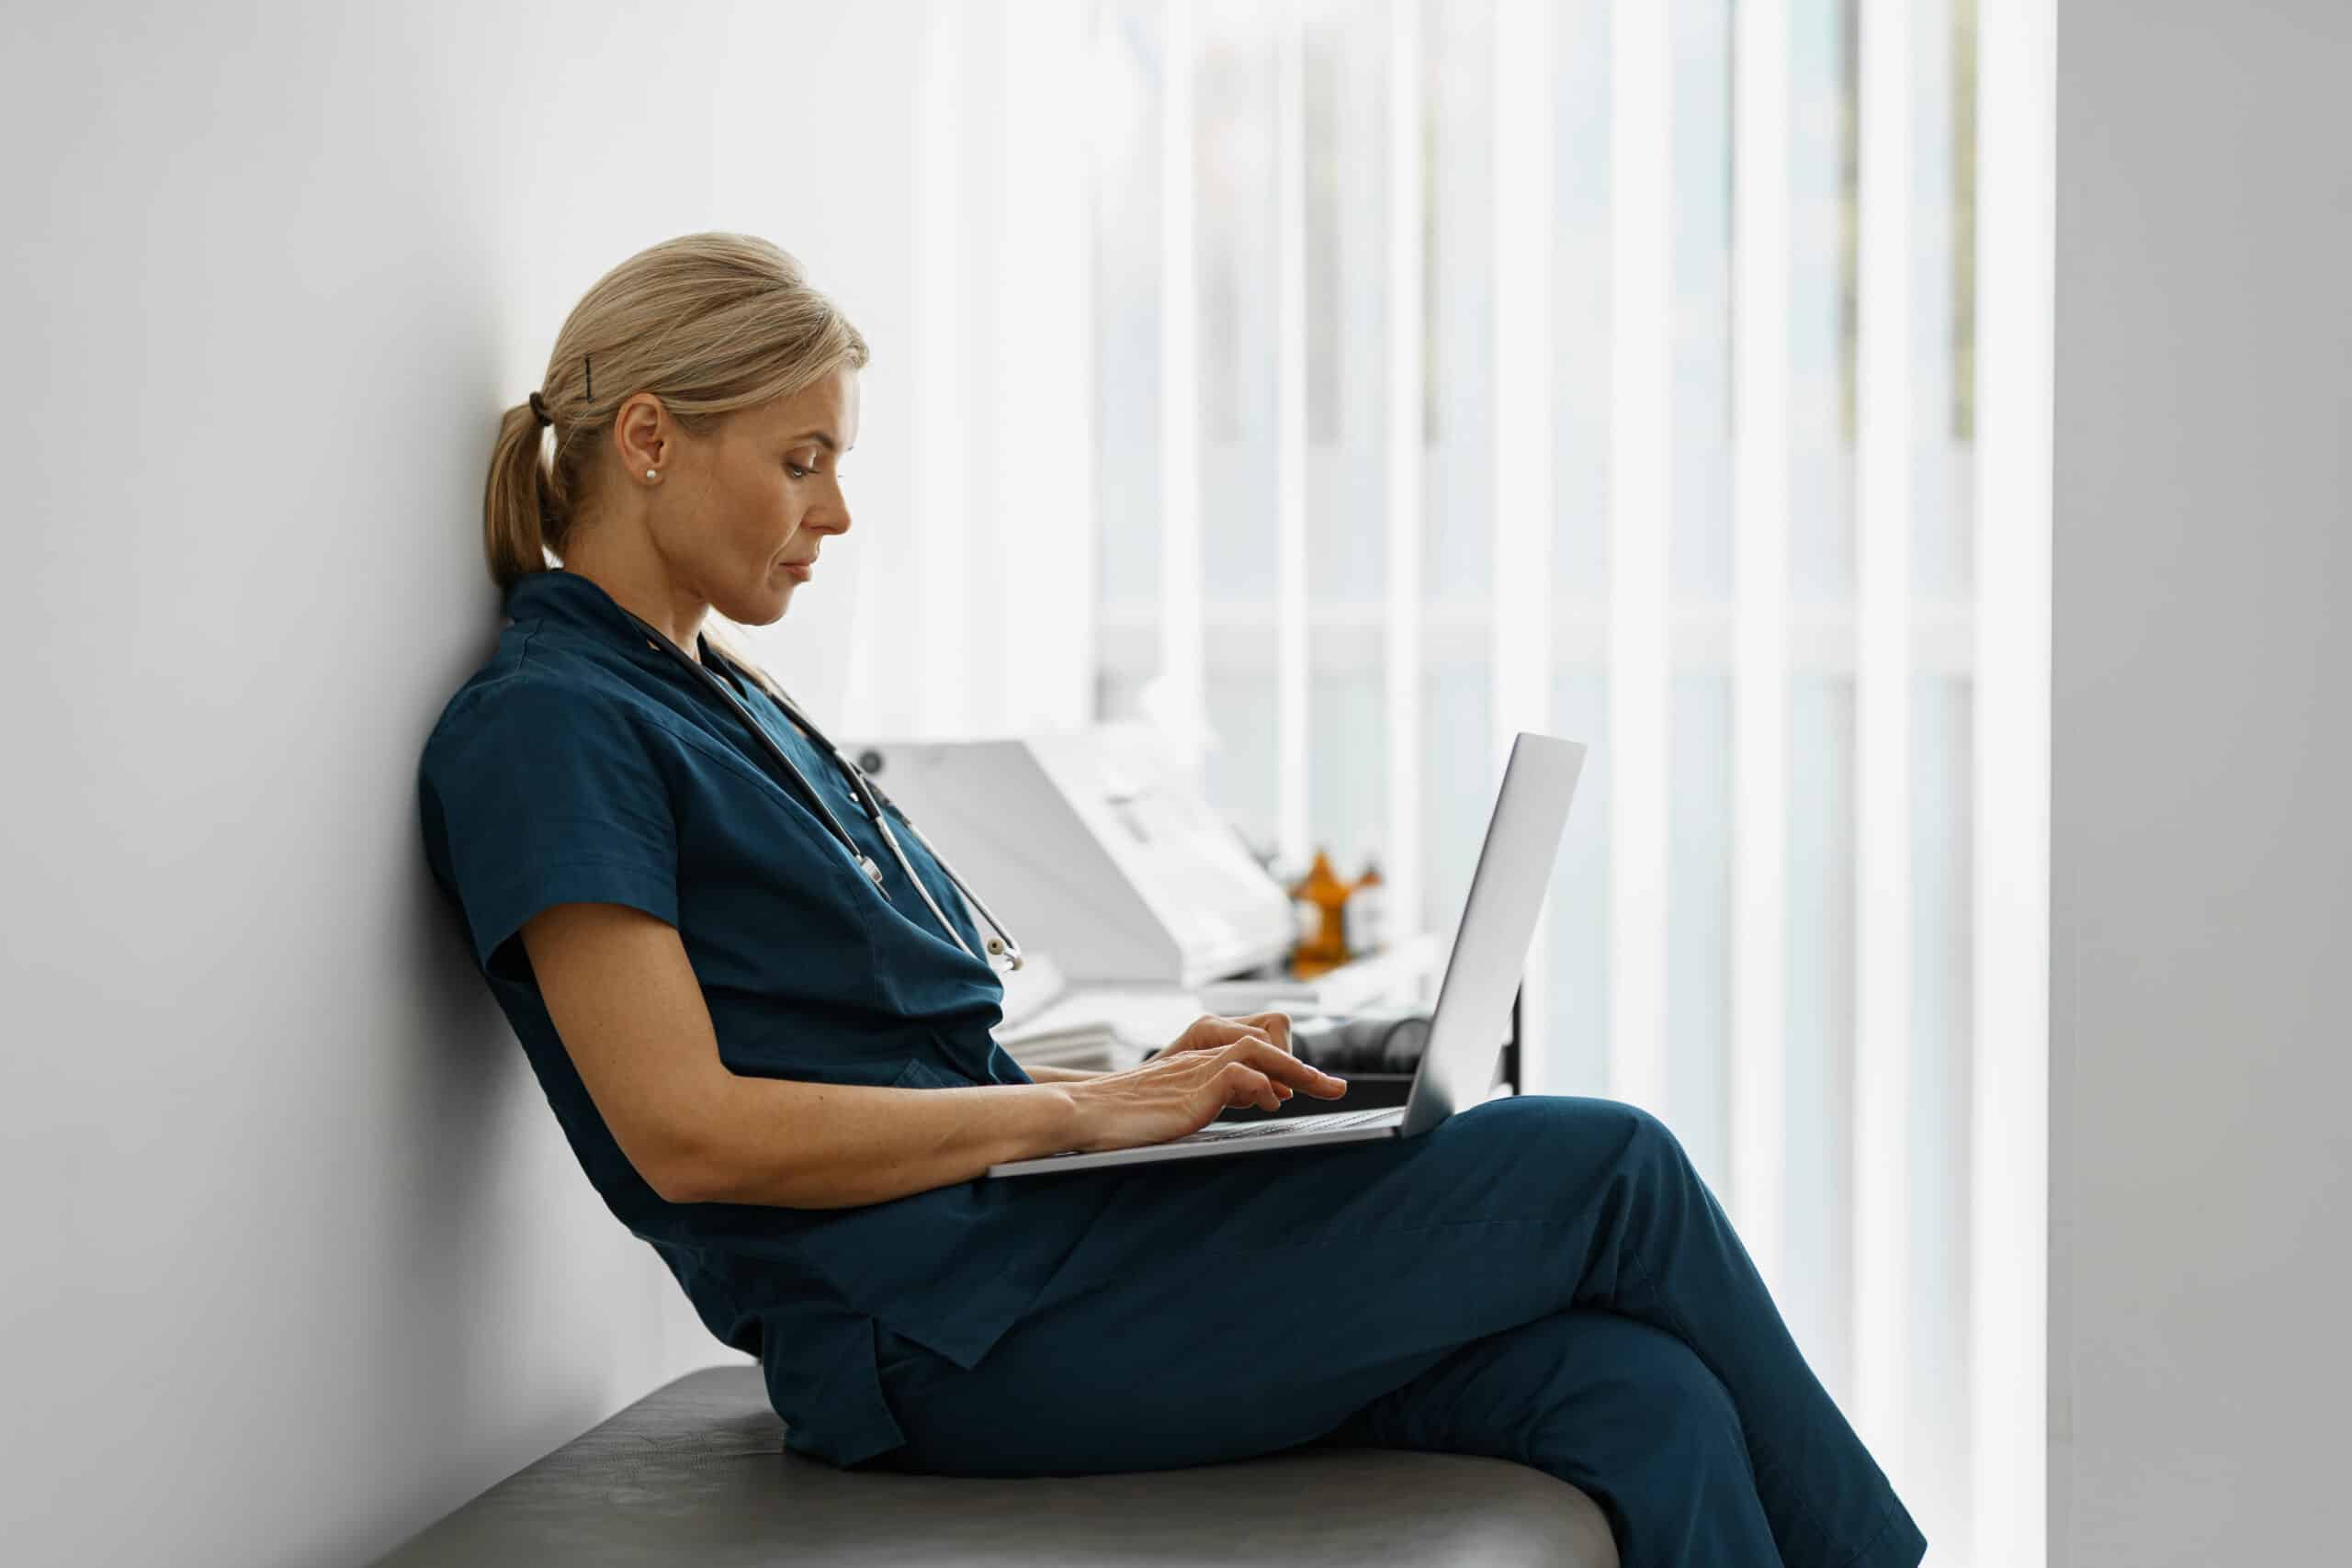 Female healthcare worker using laptop while working at doctor's office